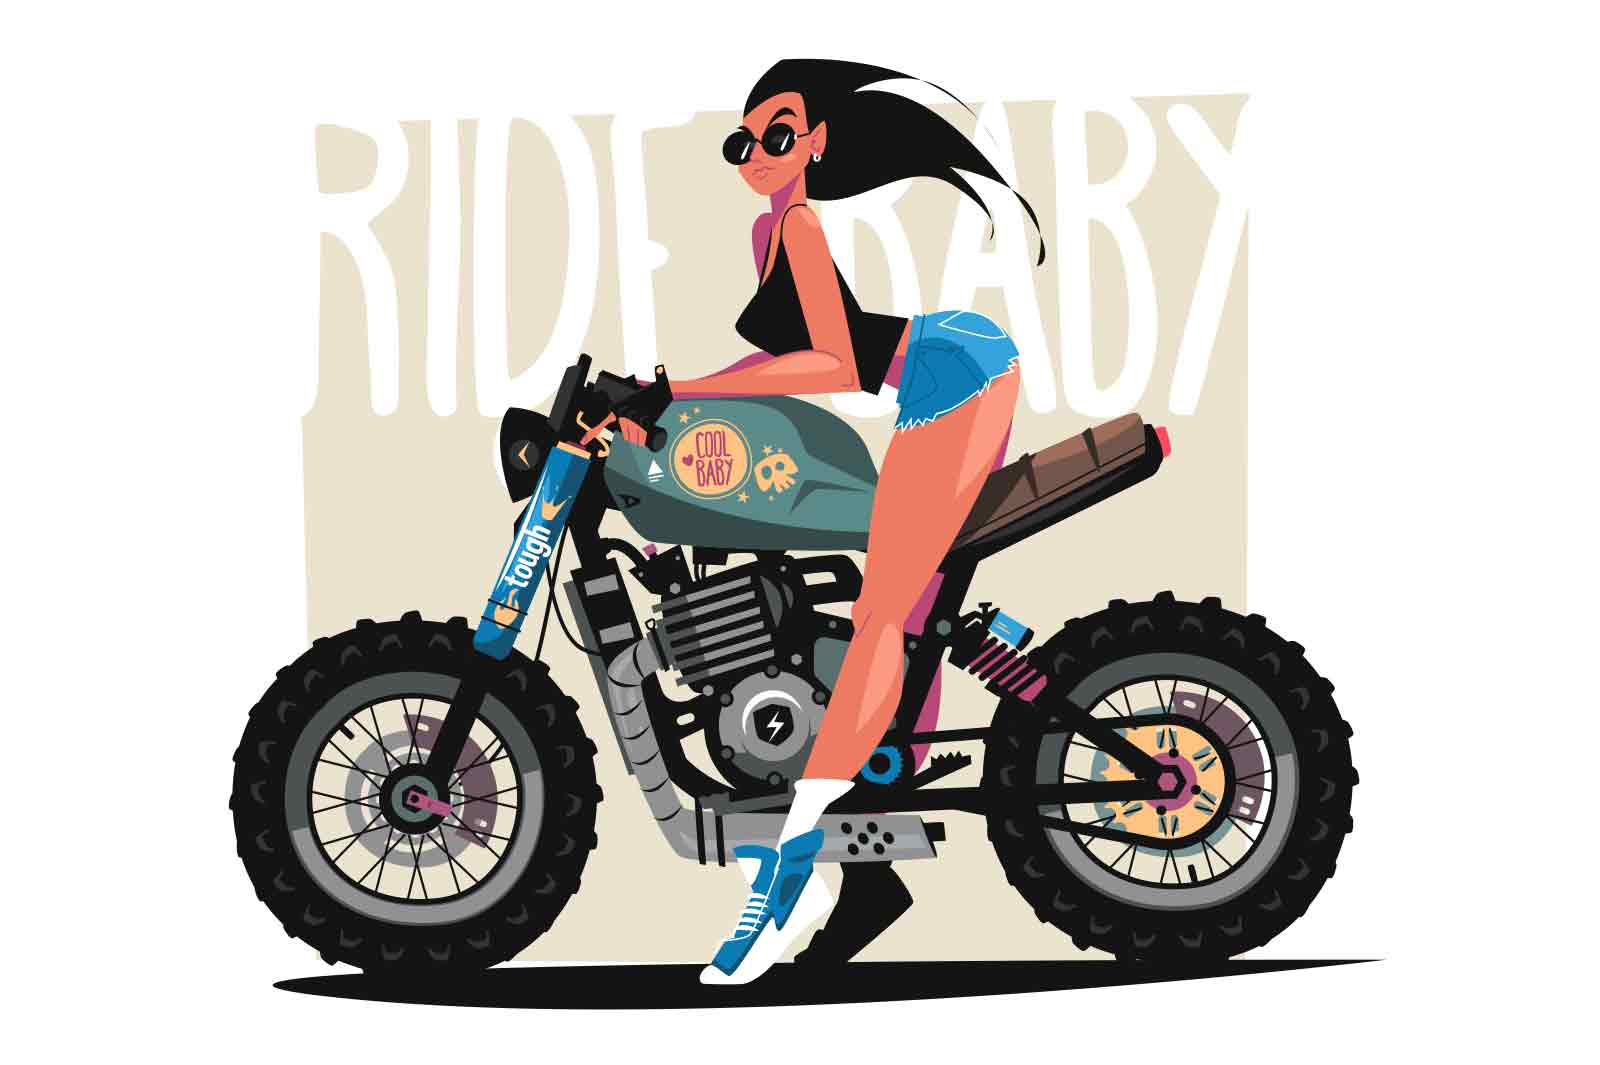 Beautiful biker girl riding motorbike vector illustration. Woman on motorcycle flat style concept. Extreme hobby idea